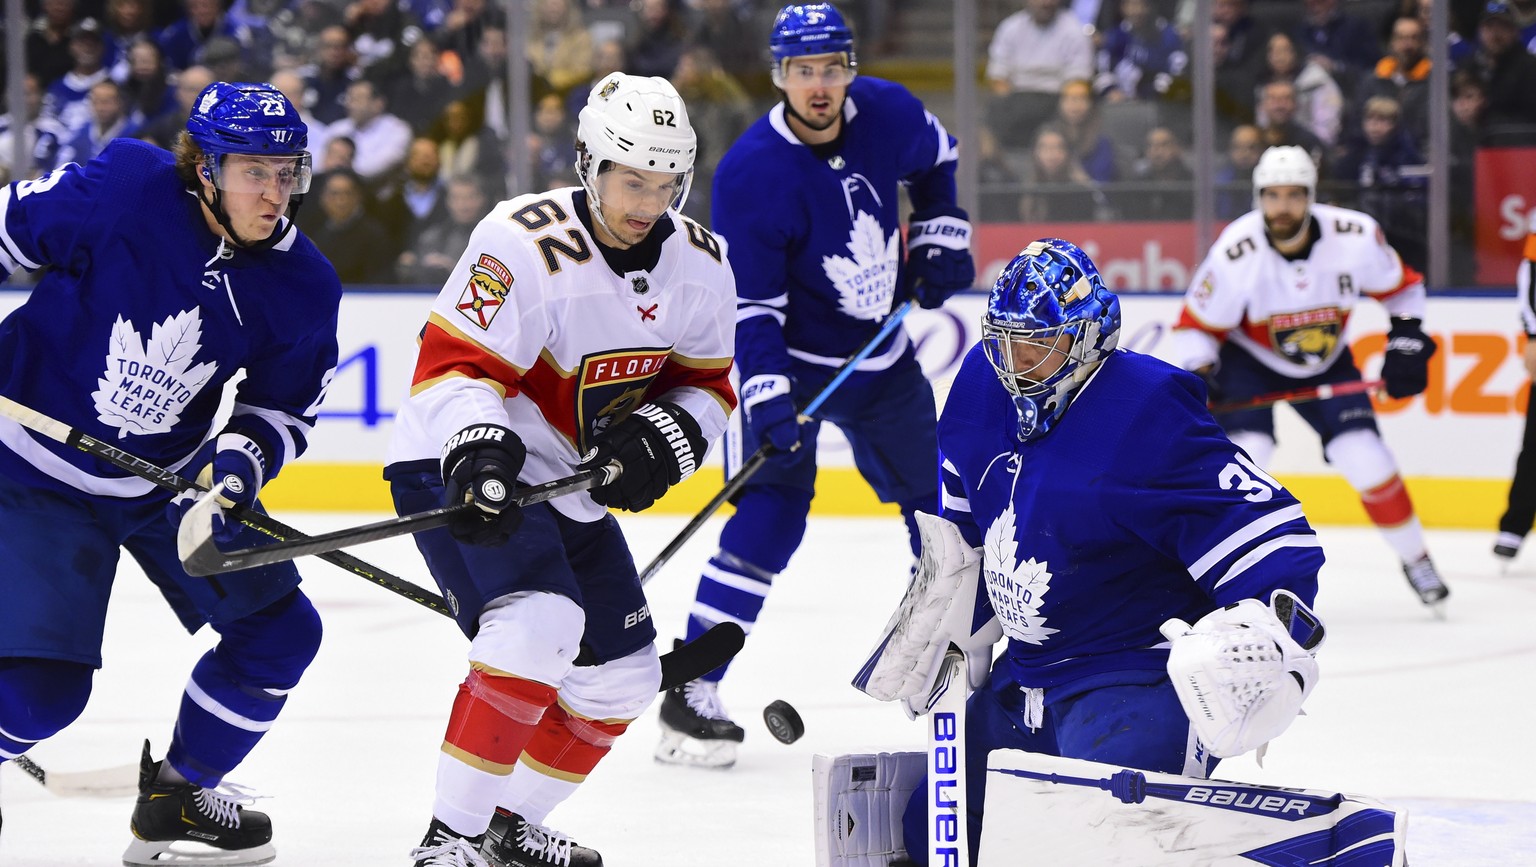 Florida Panthers center Denis Malgin (62) moves in on Toronto Maple Leafs goaltender Frederik Andersen (31) as Maple Leafs Travis Dermott (23) defends during the first period of an NHL hockey game, Mo ...